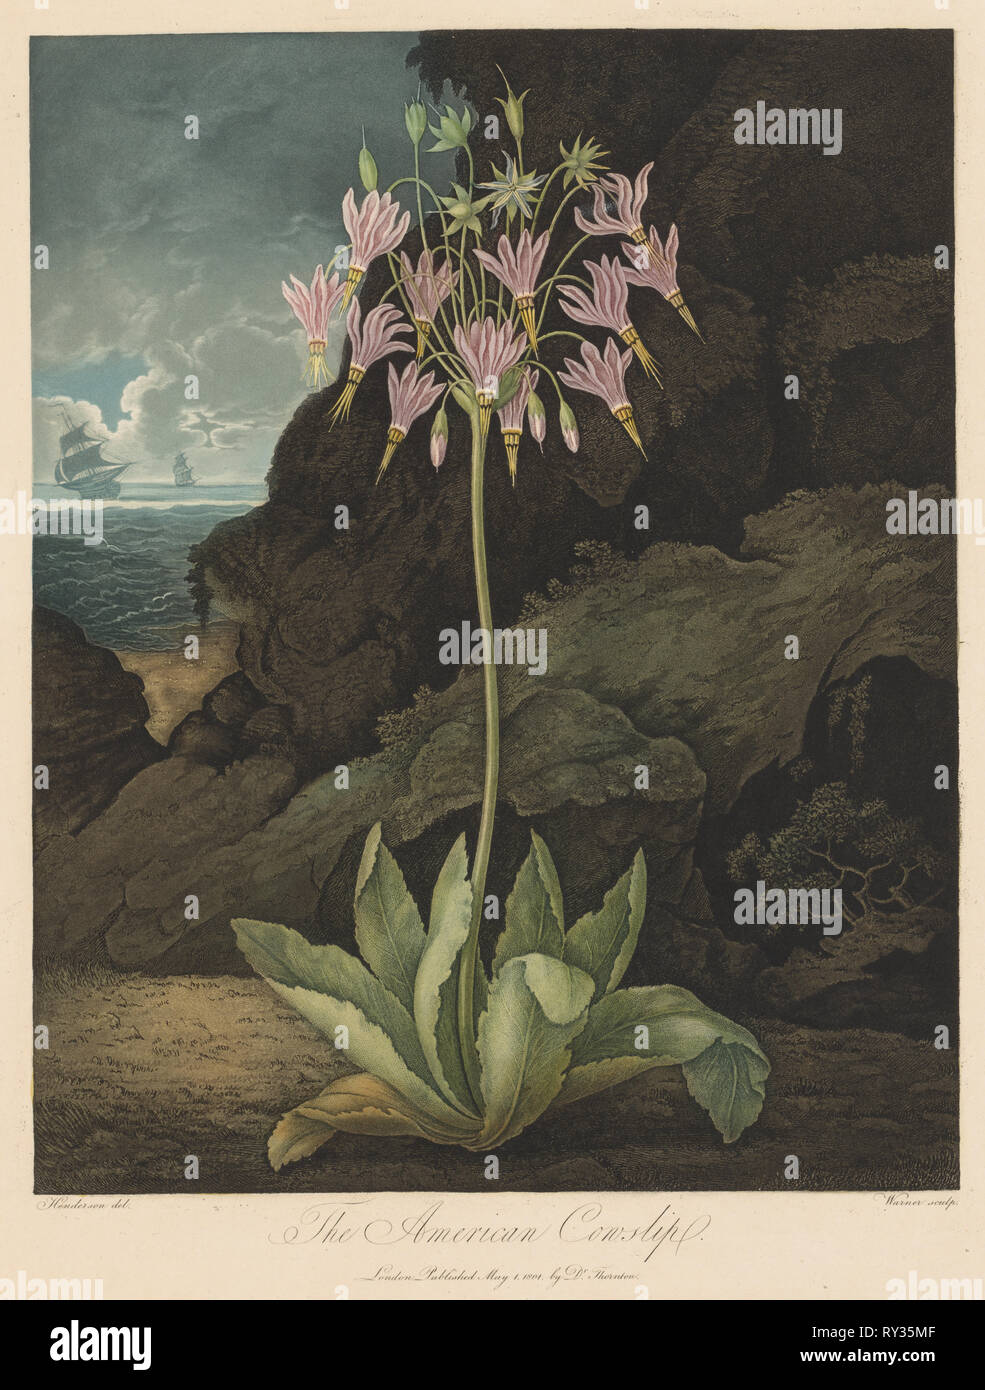 The Temple of Flora, or Garden of Nature:  The American Cowslip, 1801. Robert John Thornton (British, 1768-1837). Aquatint, stipple and line engraving Stock Photo